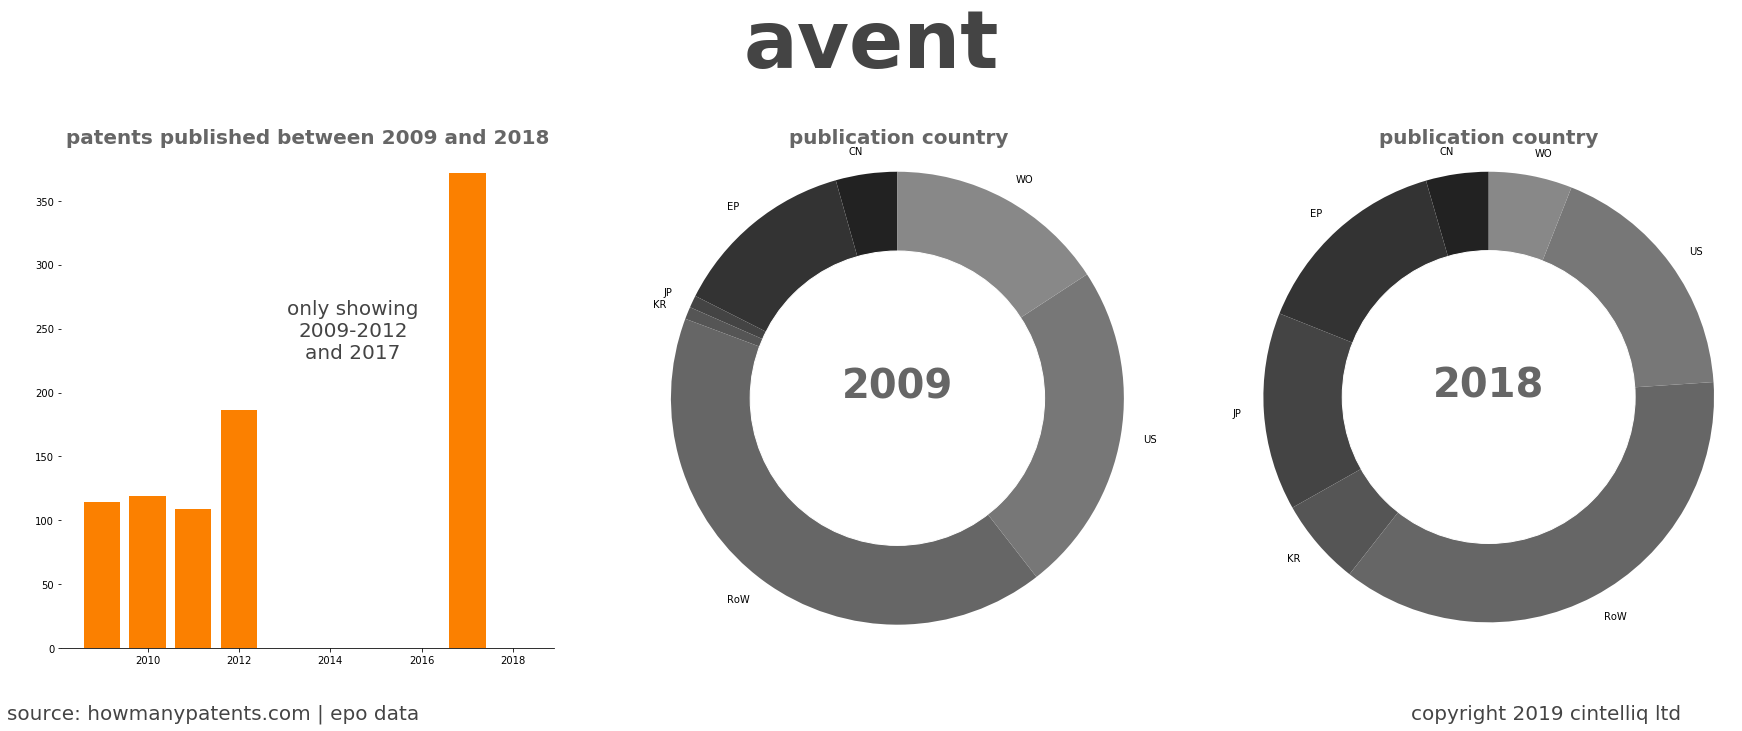 summary of patents for Avent